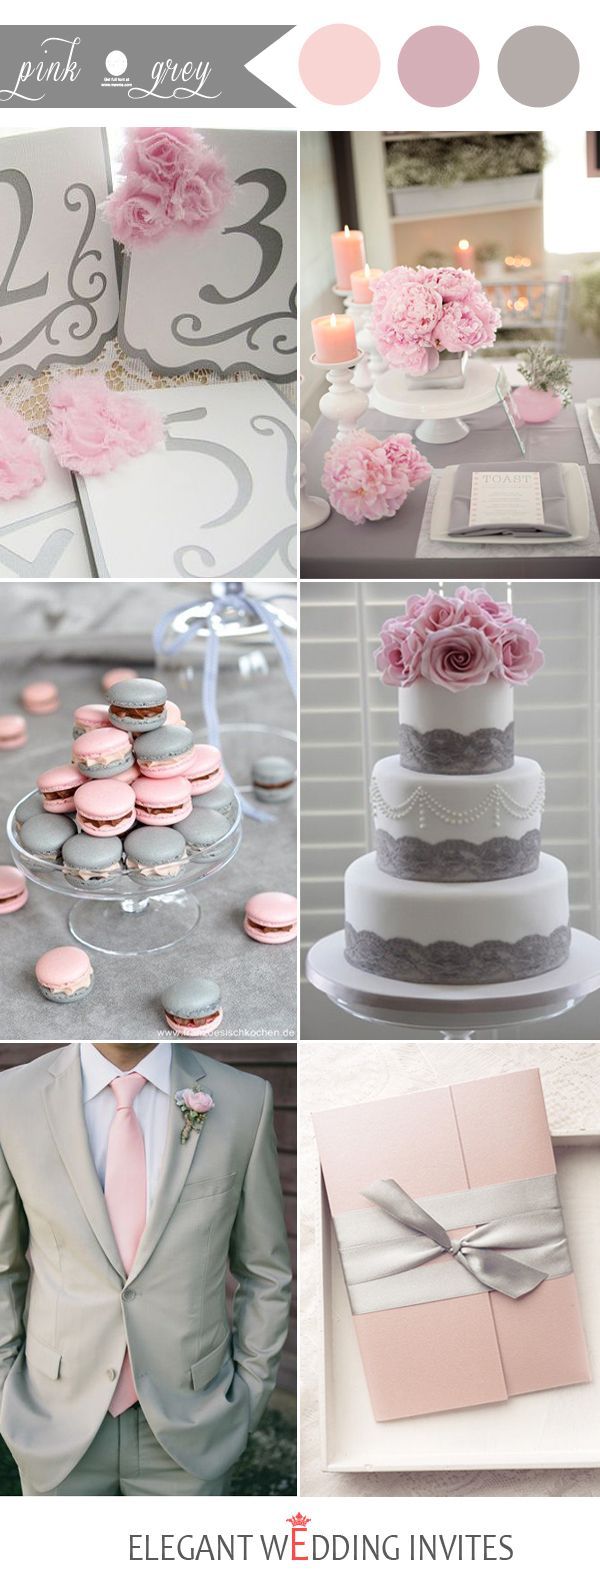 pink and grey wedding color inspiration